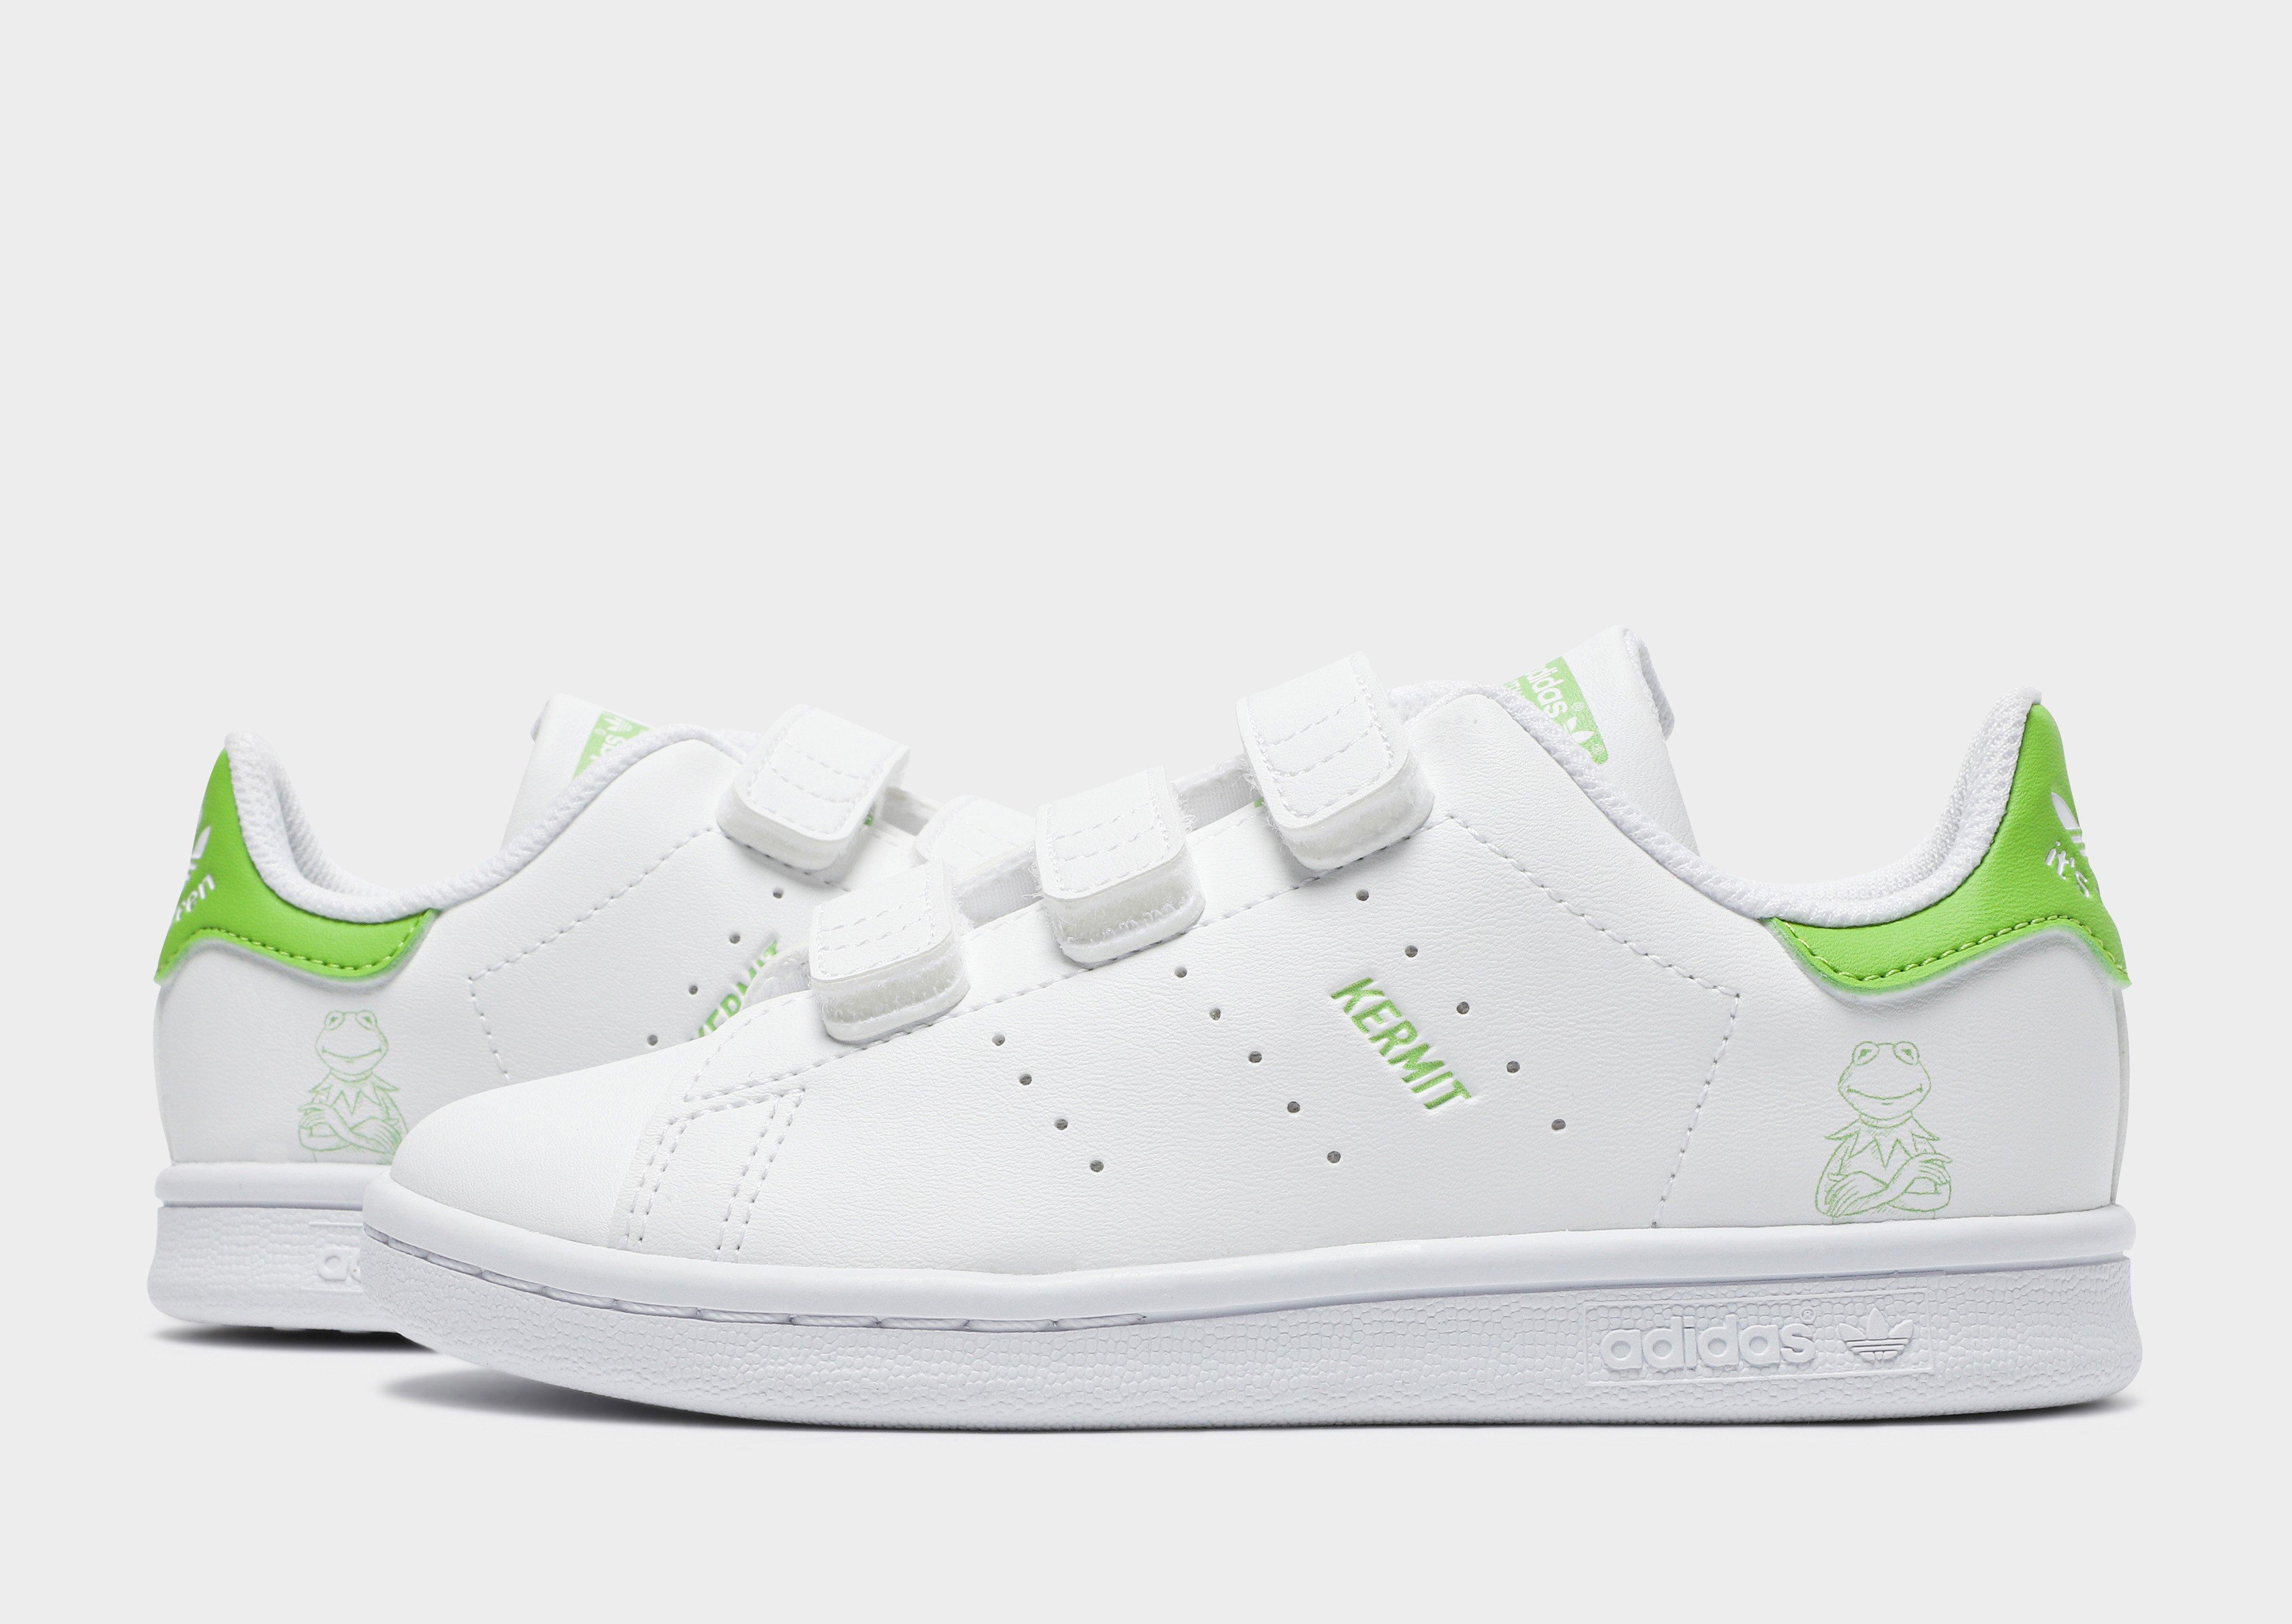 frog tennis shoes